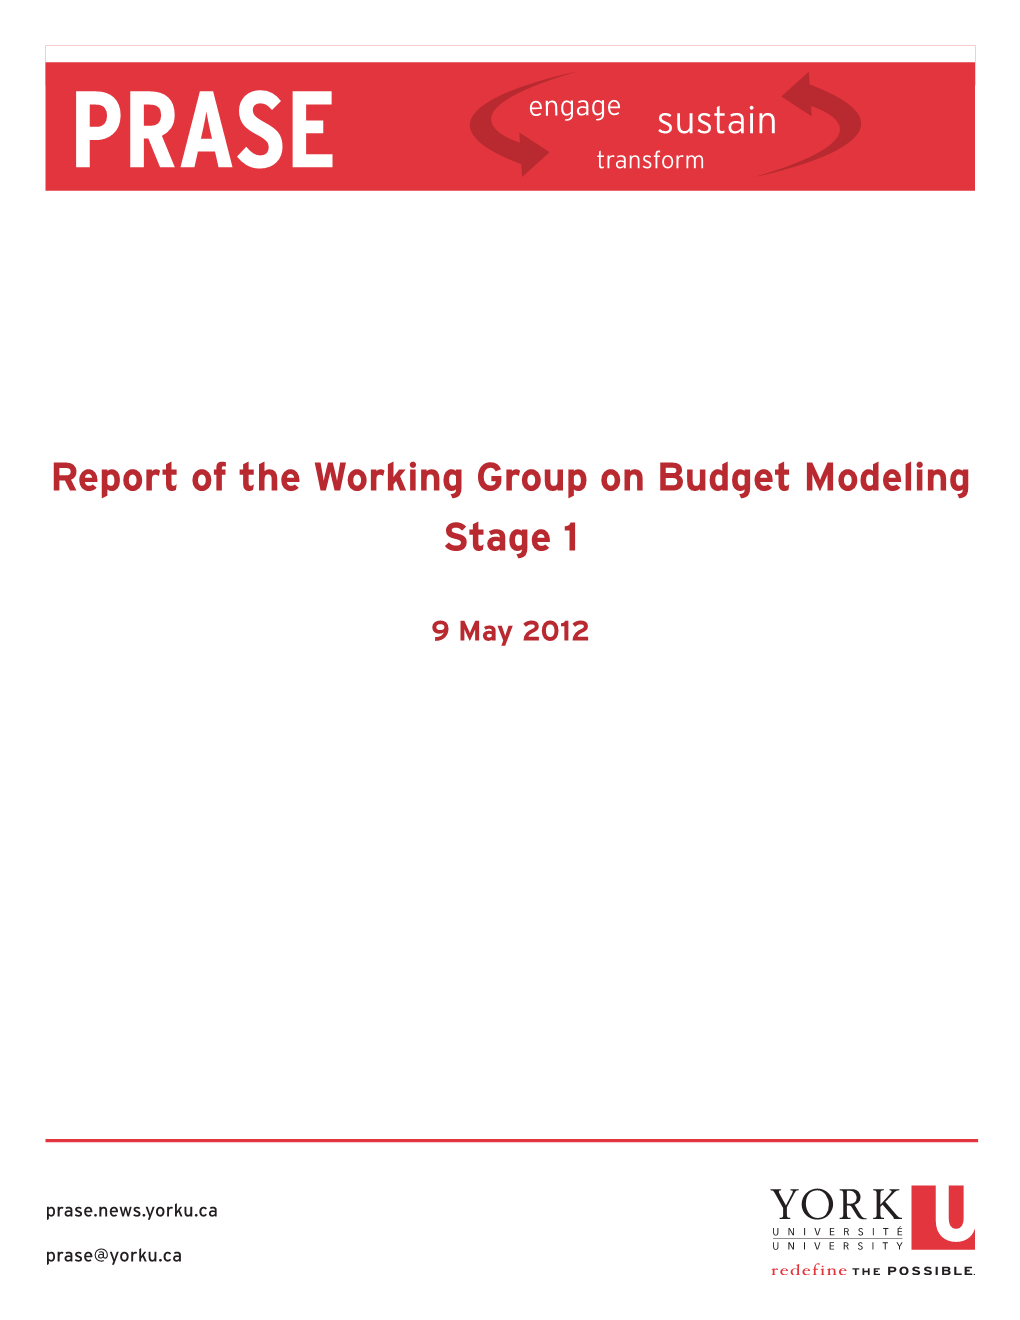 Report of the Working Group on Budget Modeling Stage 1